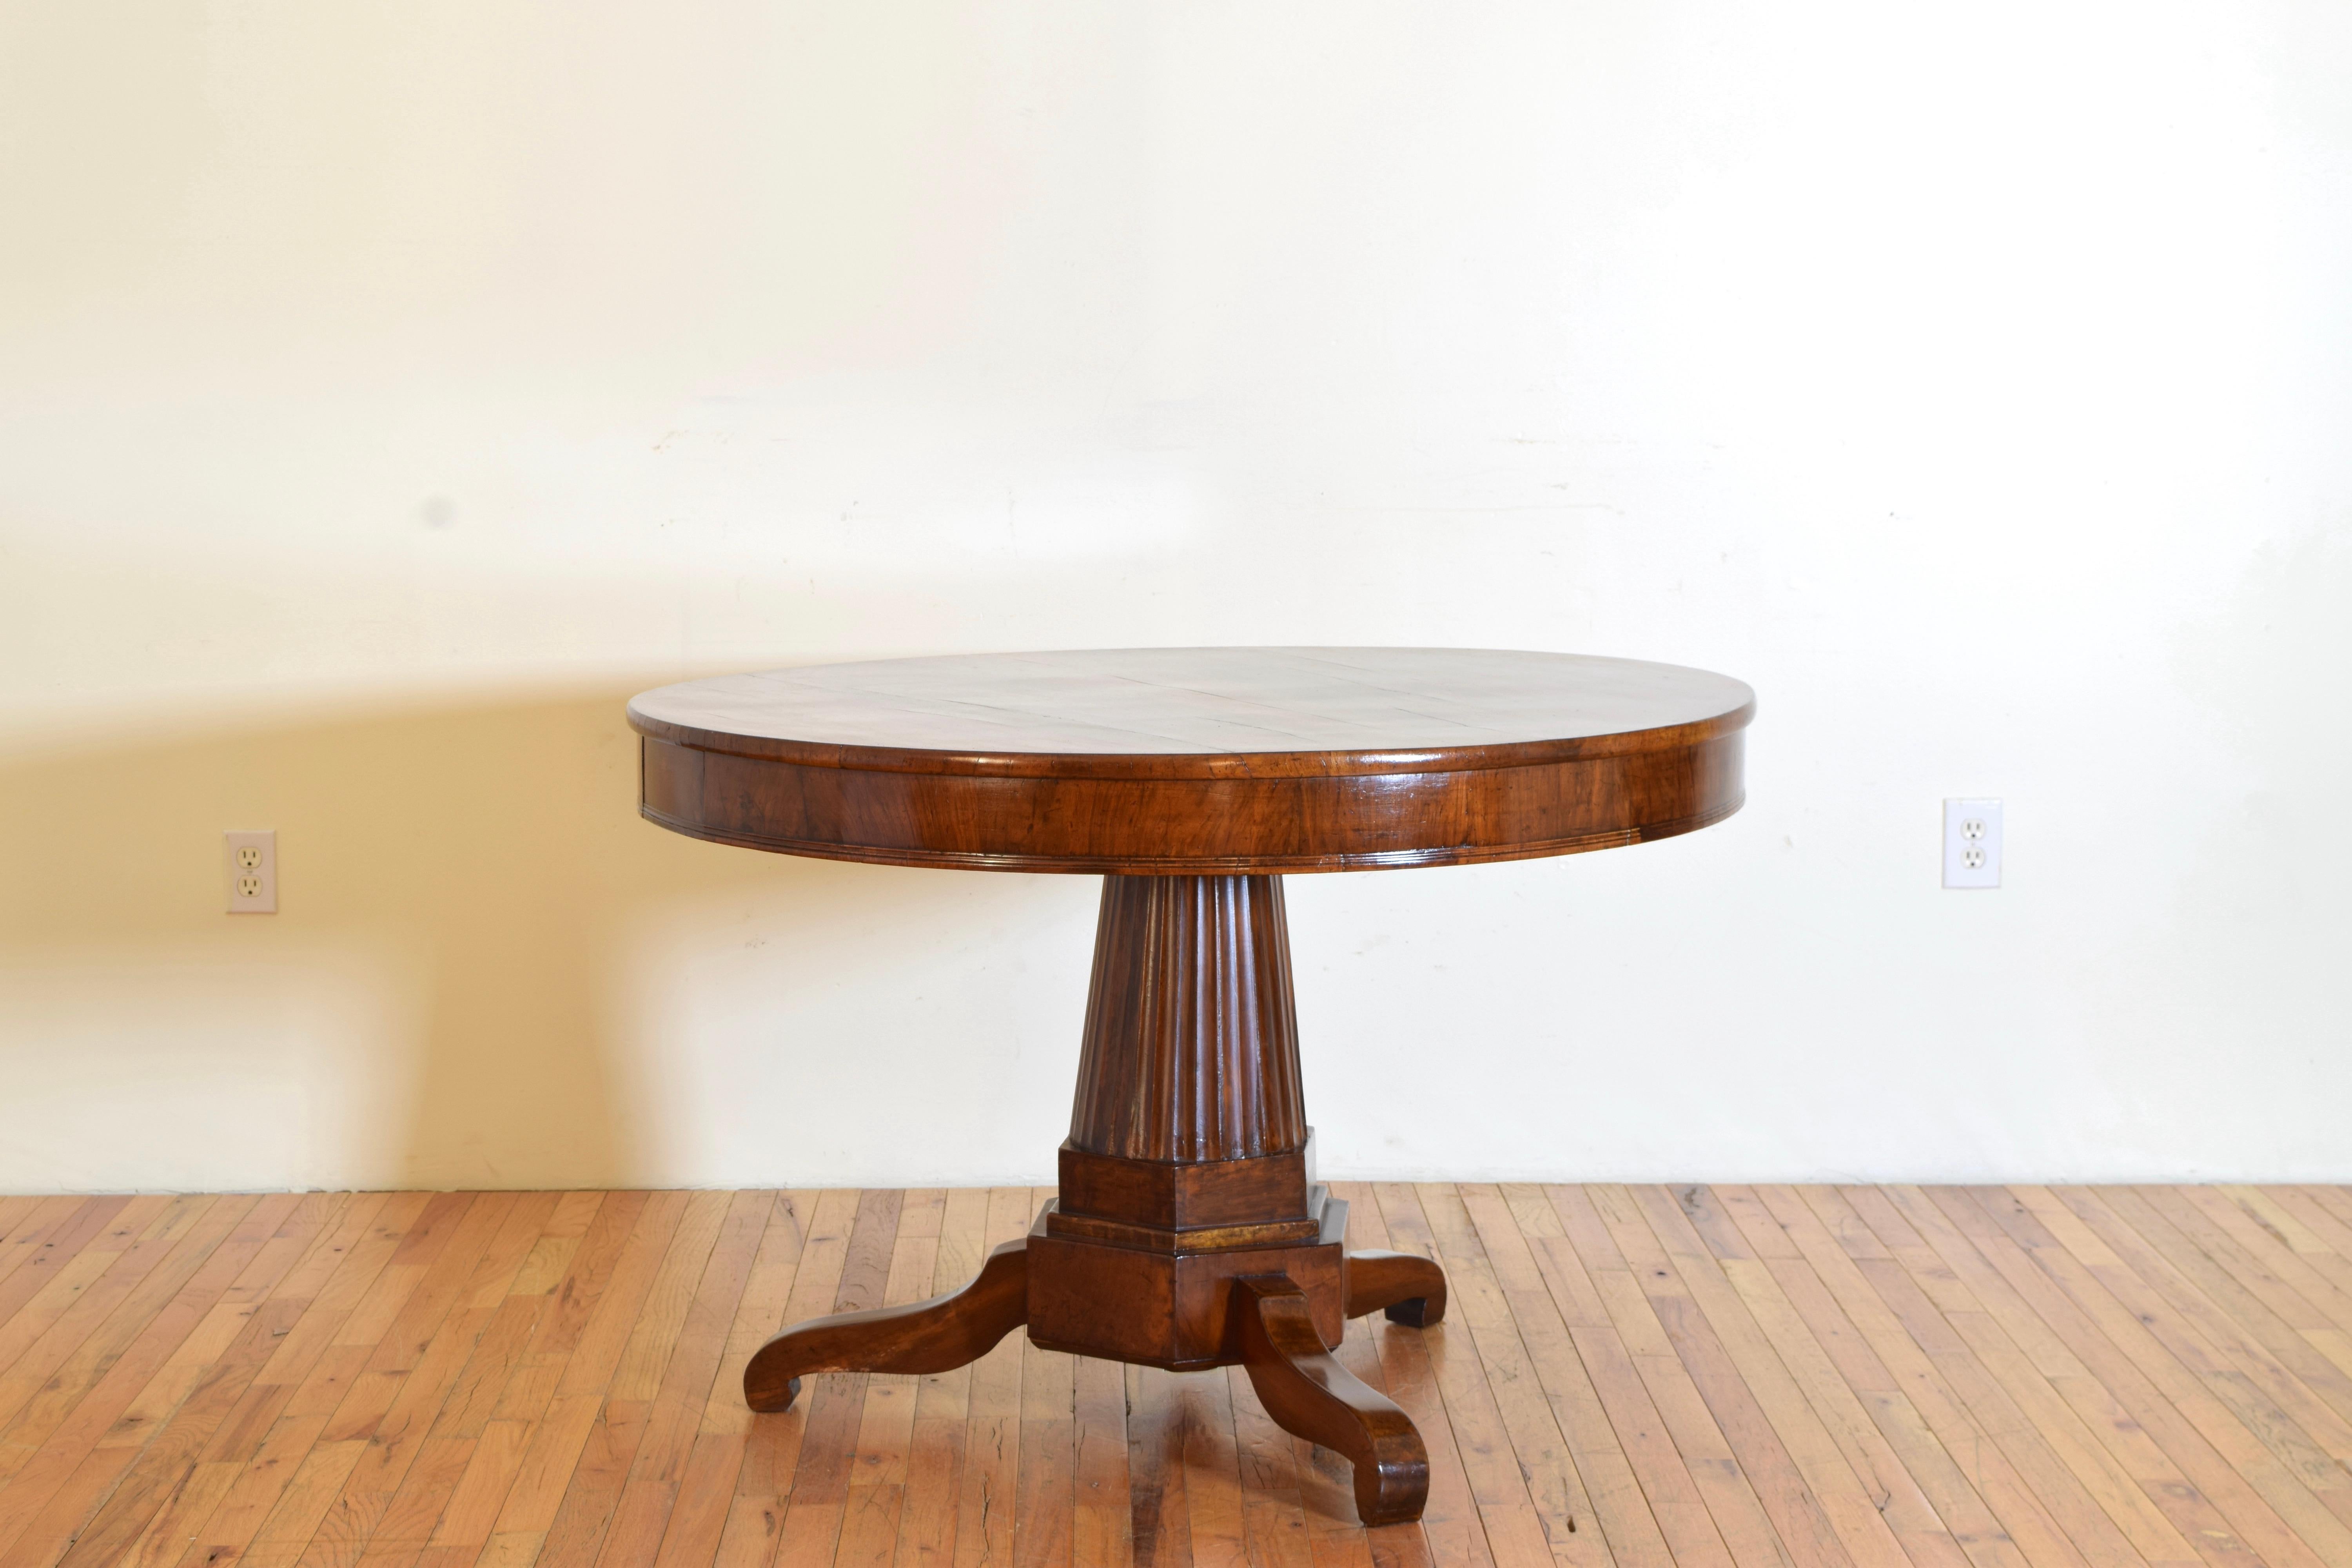 Having a circular top with an apron housing two opposite drawers over a bold fluted and tapering pedestal atop a hexagonal base raised on three carved legs. The walnut is solid with a wonderful patina.